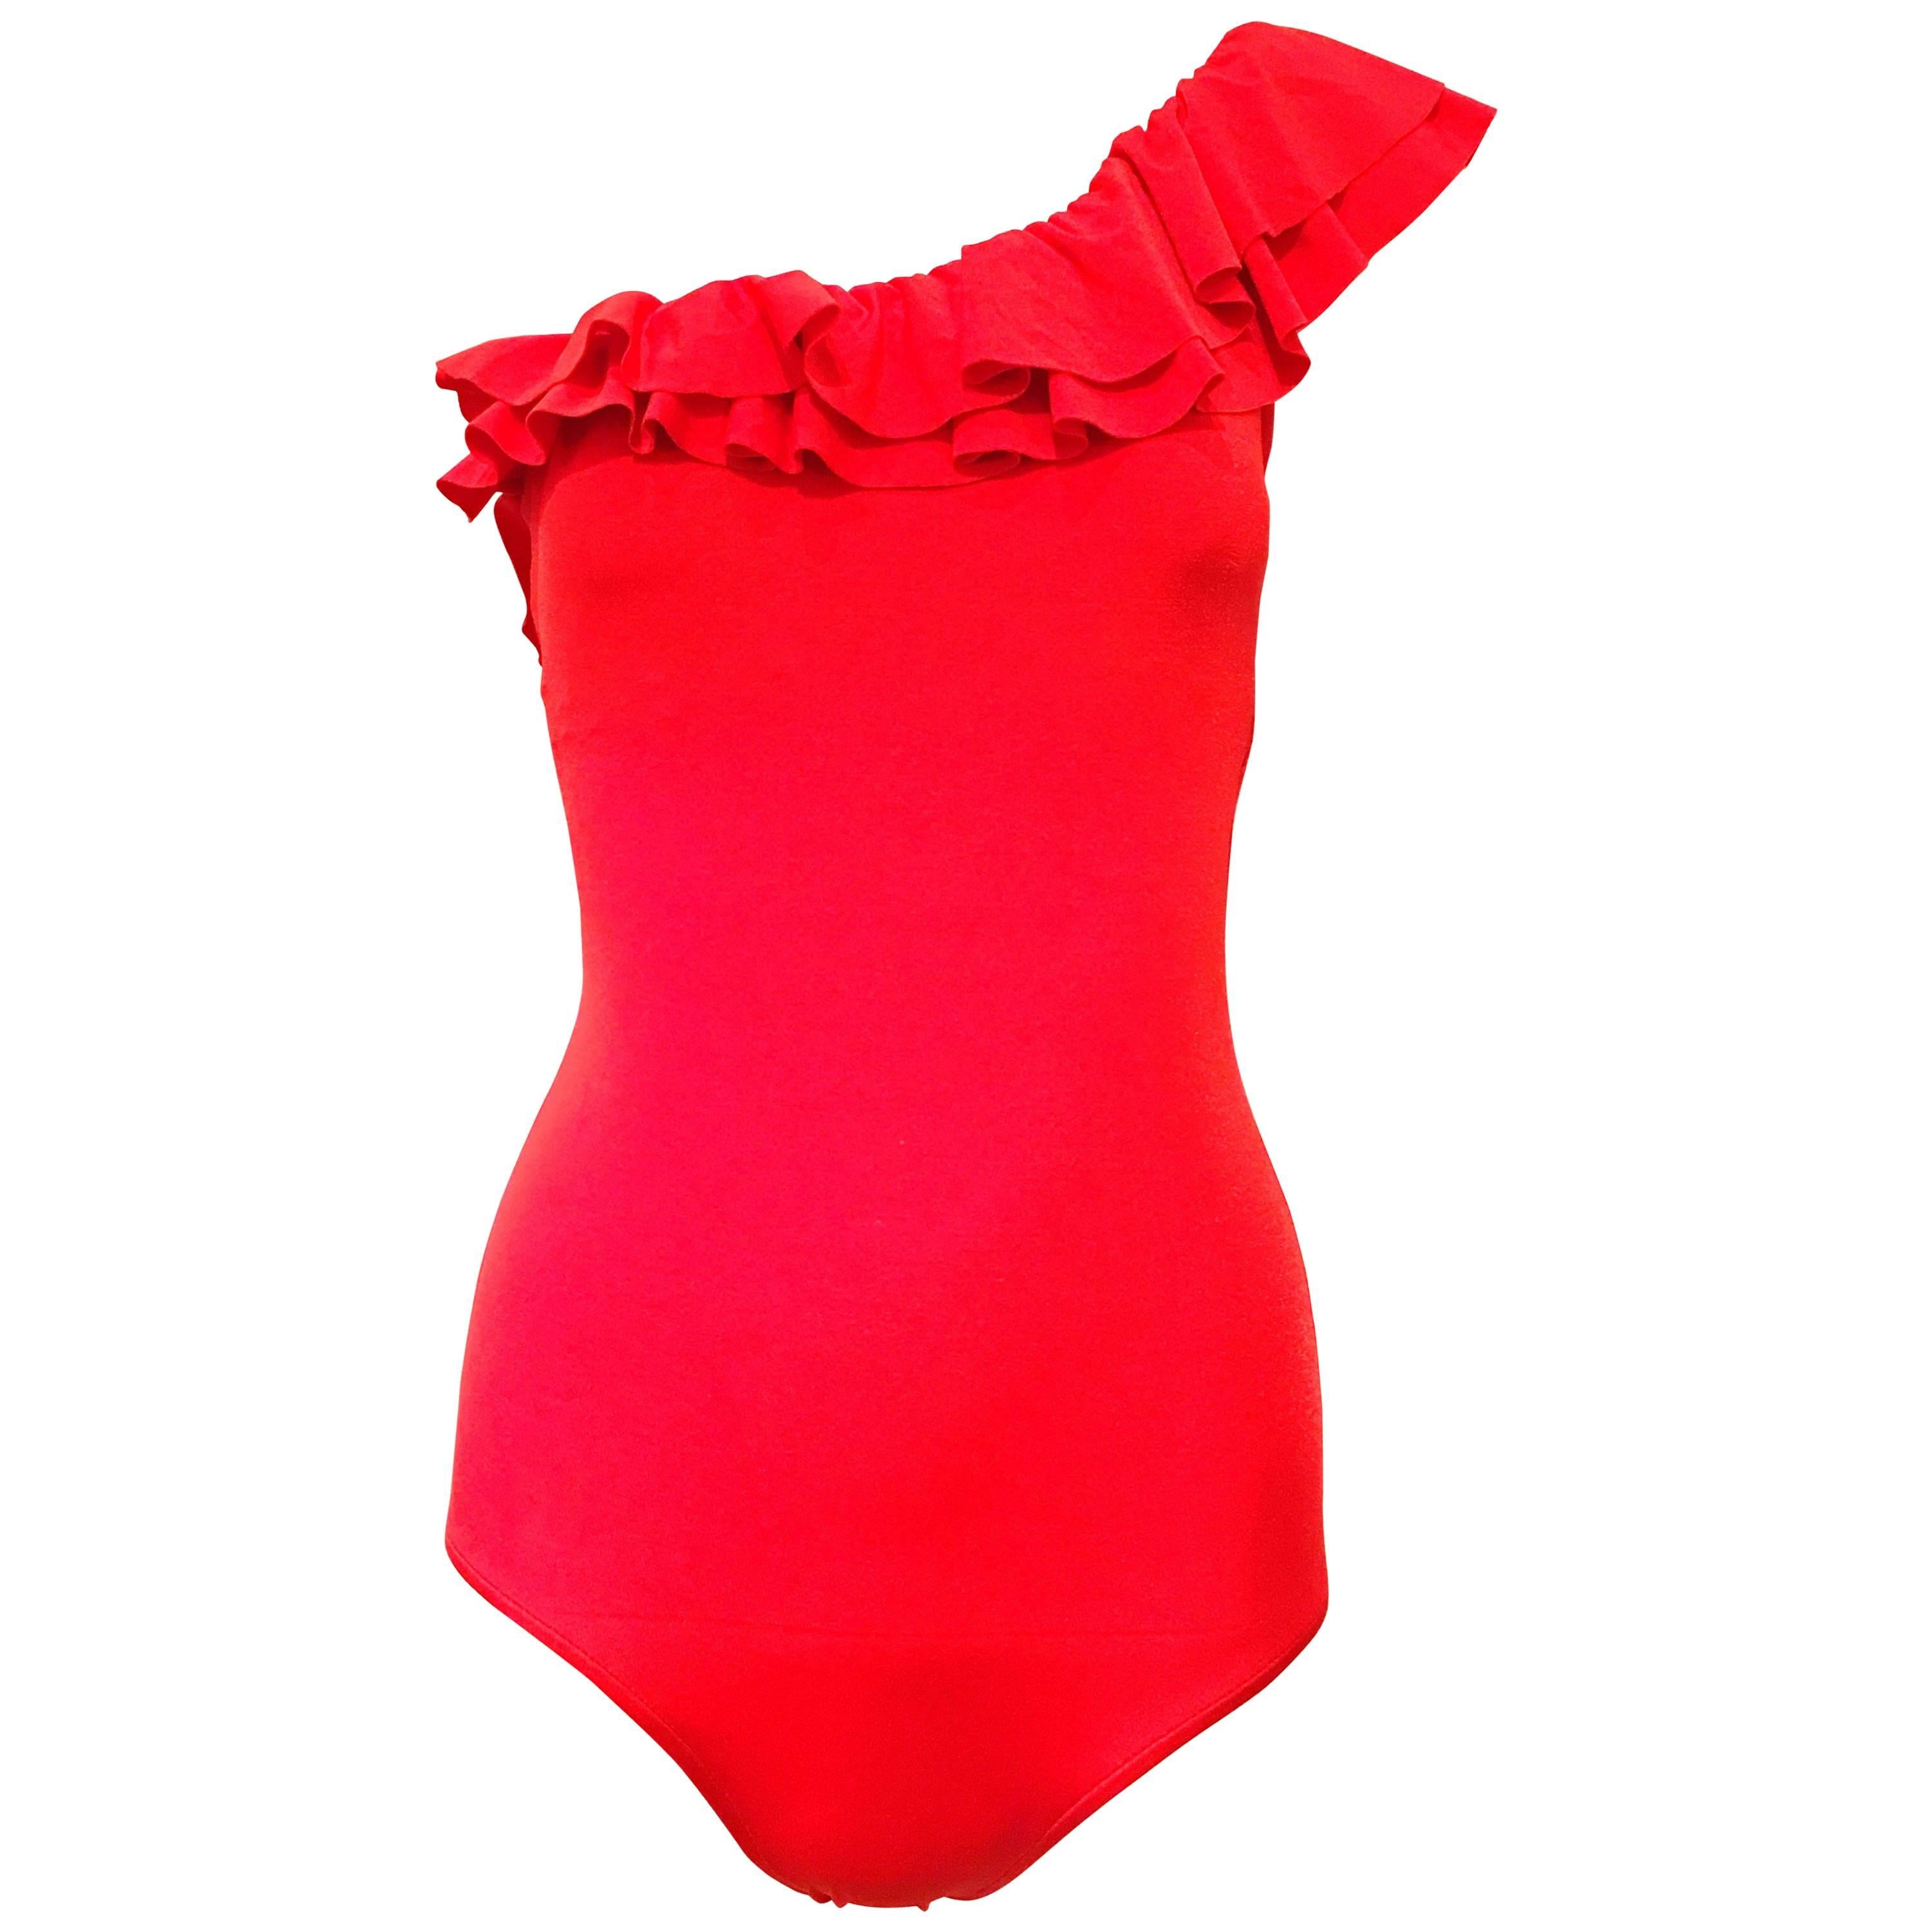 Bill Blass Red One Shoulder Ruffle Trim Bathing Suit For Sale